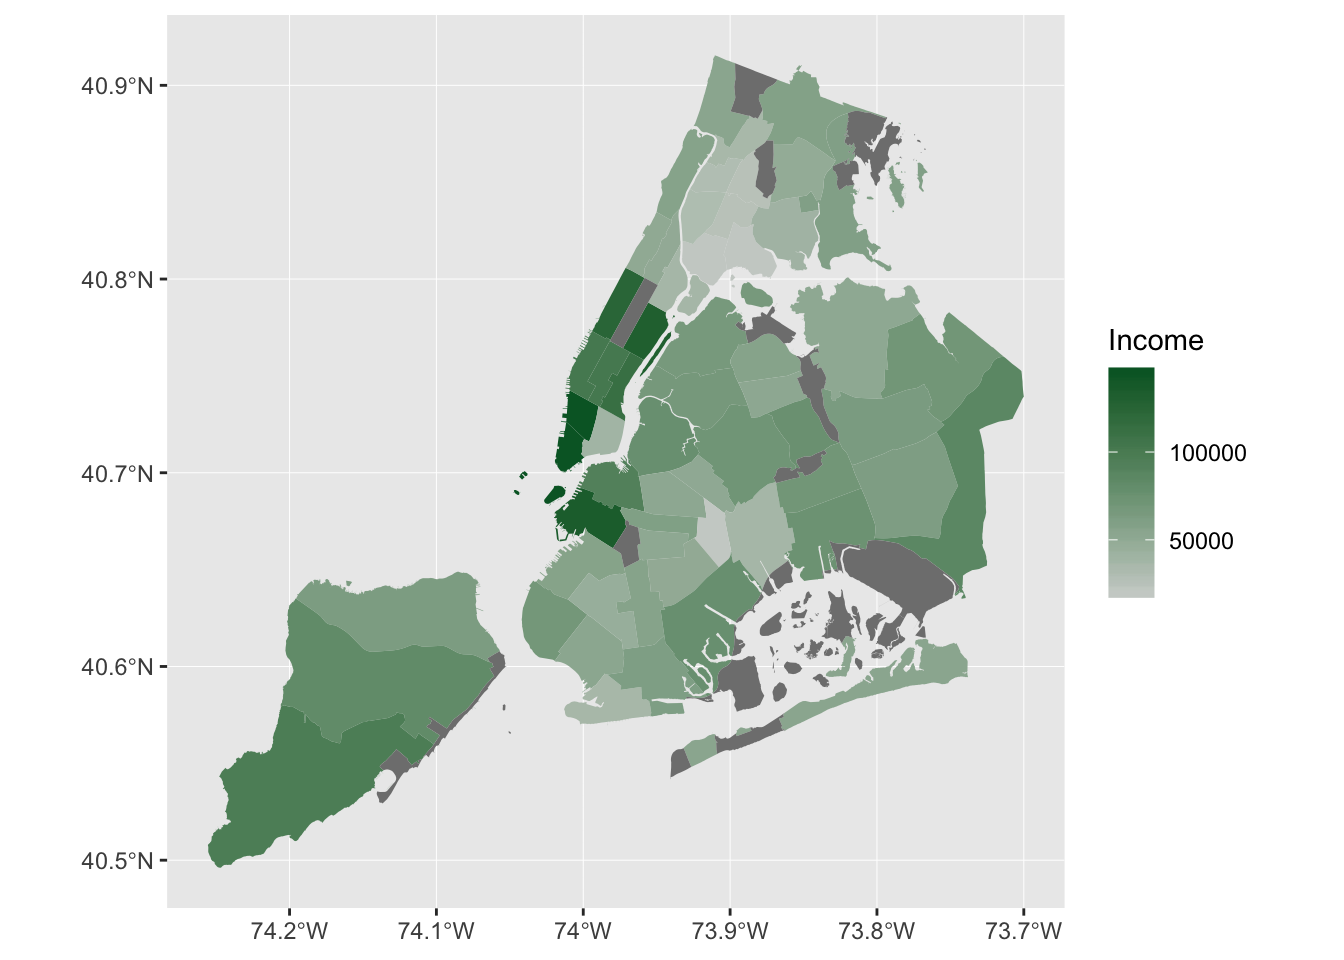 A choropleth map that indicates the income levels across New York City at the community district level